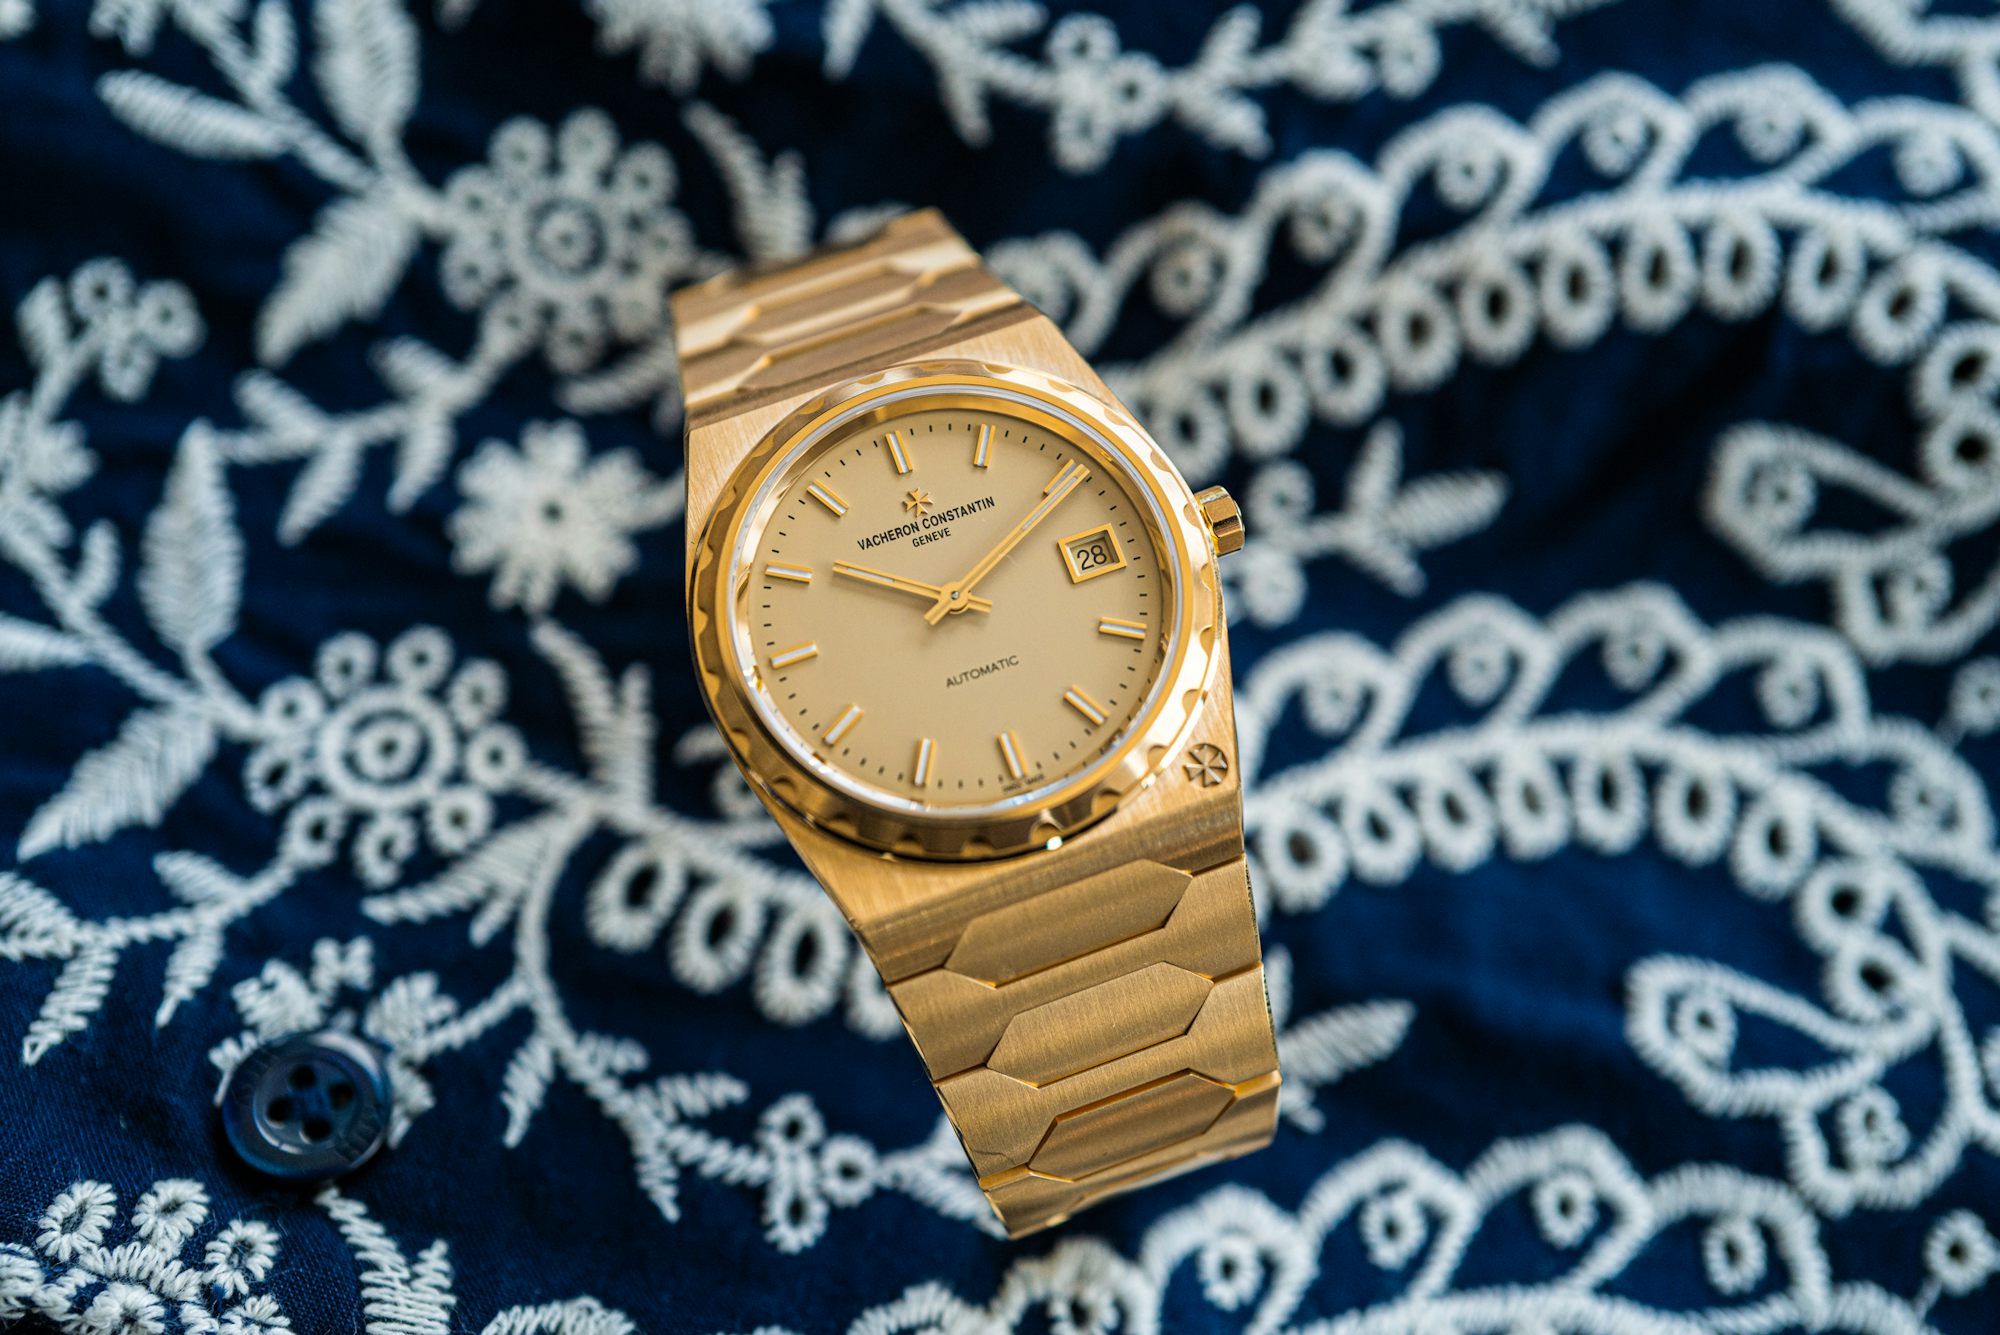 Vacheron Constantin 222 in gold on an embroidered background